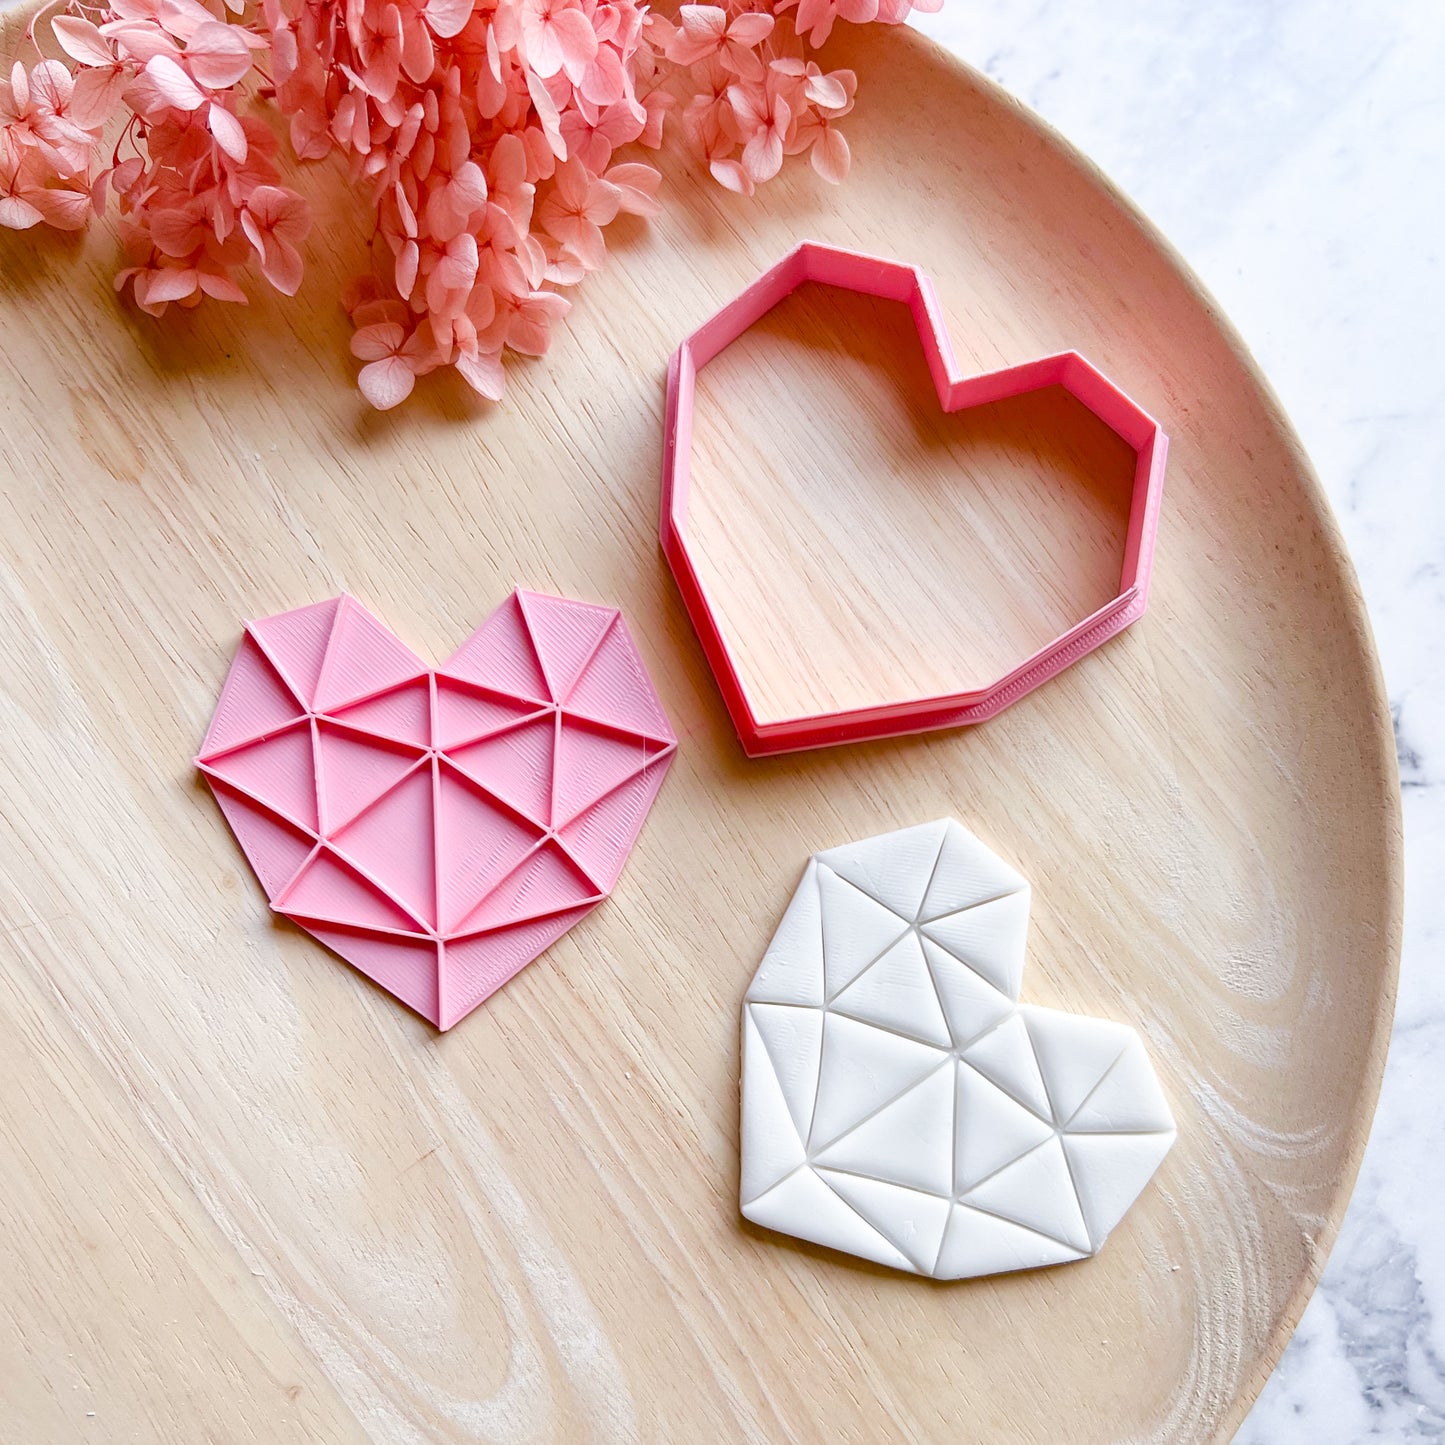 Origami Heart Cookie Cutter & Stamp